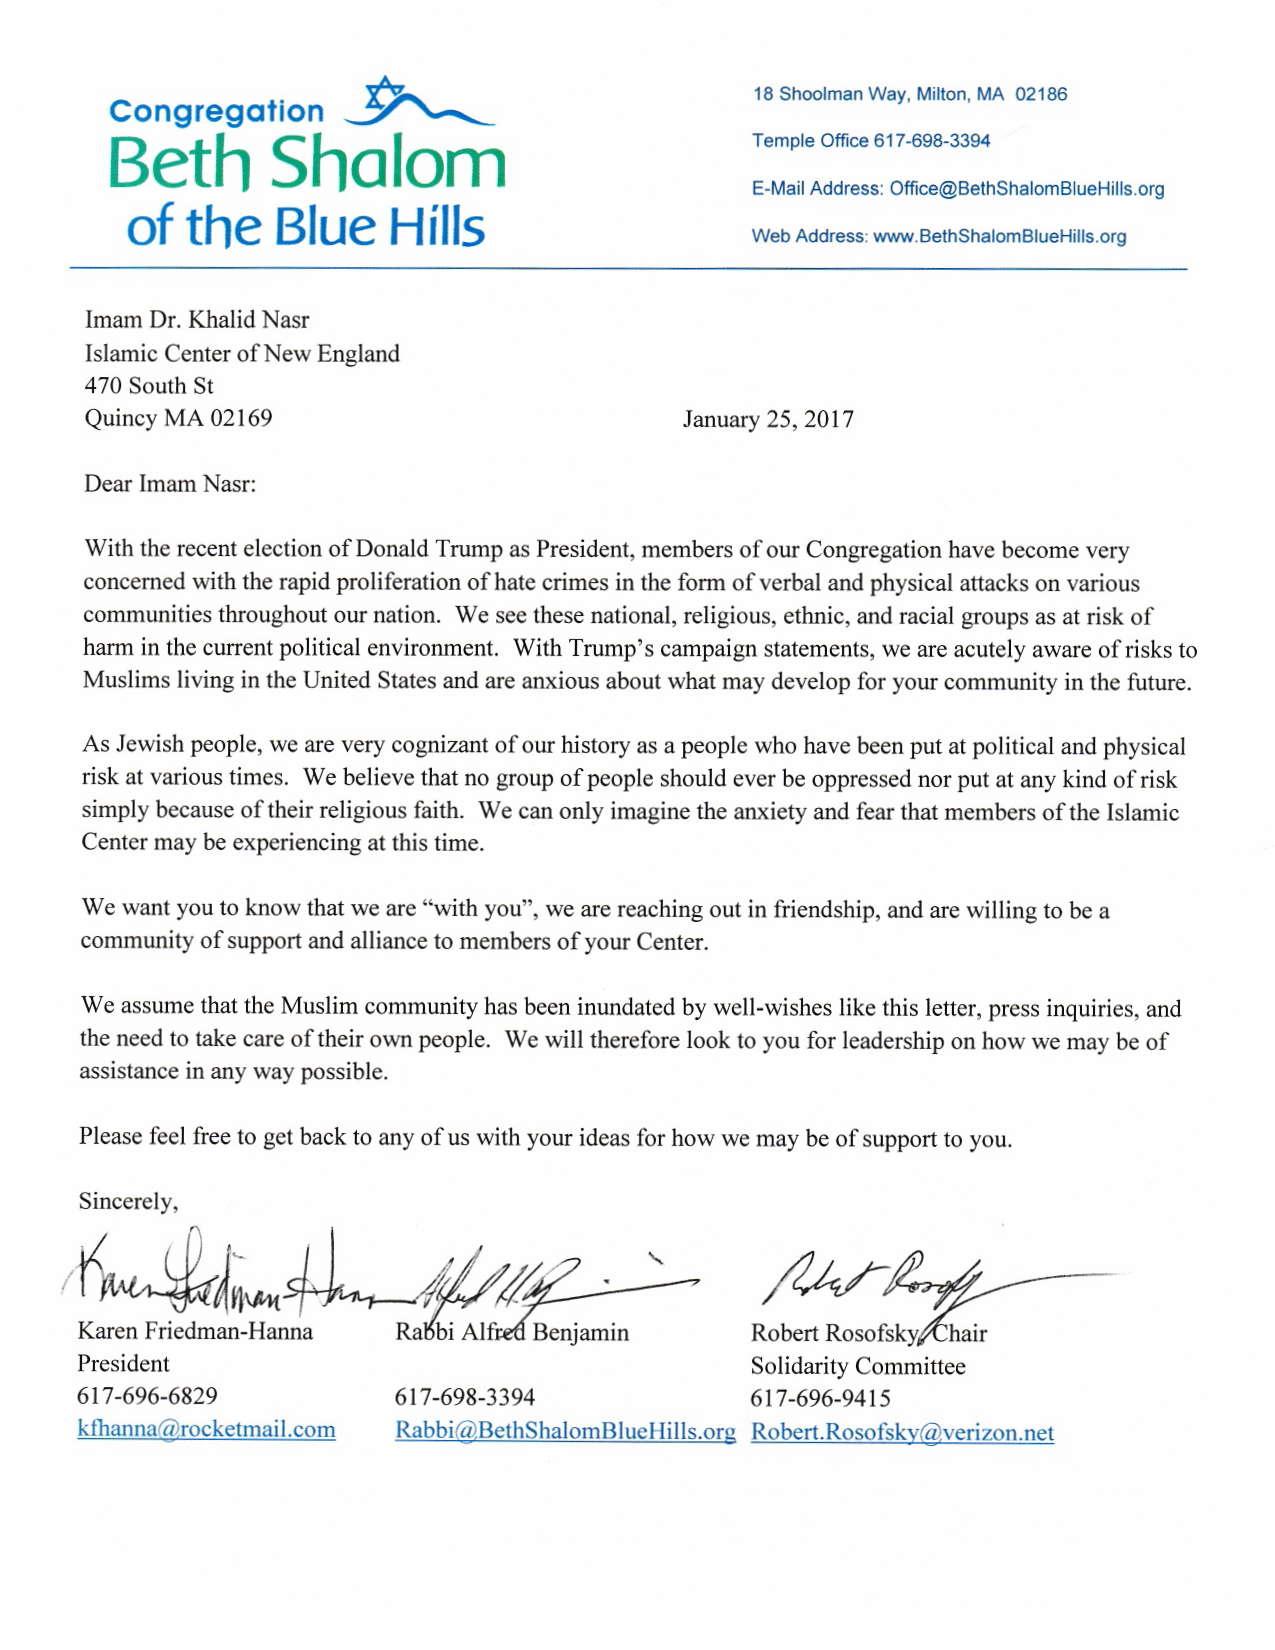 Letter from CBSBH to Quincy Mosque